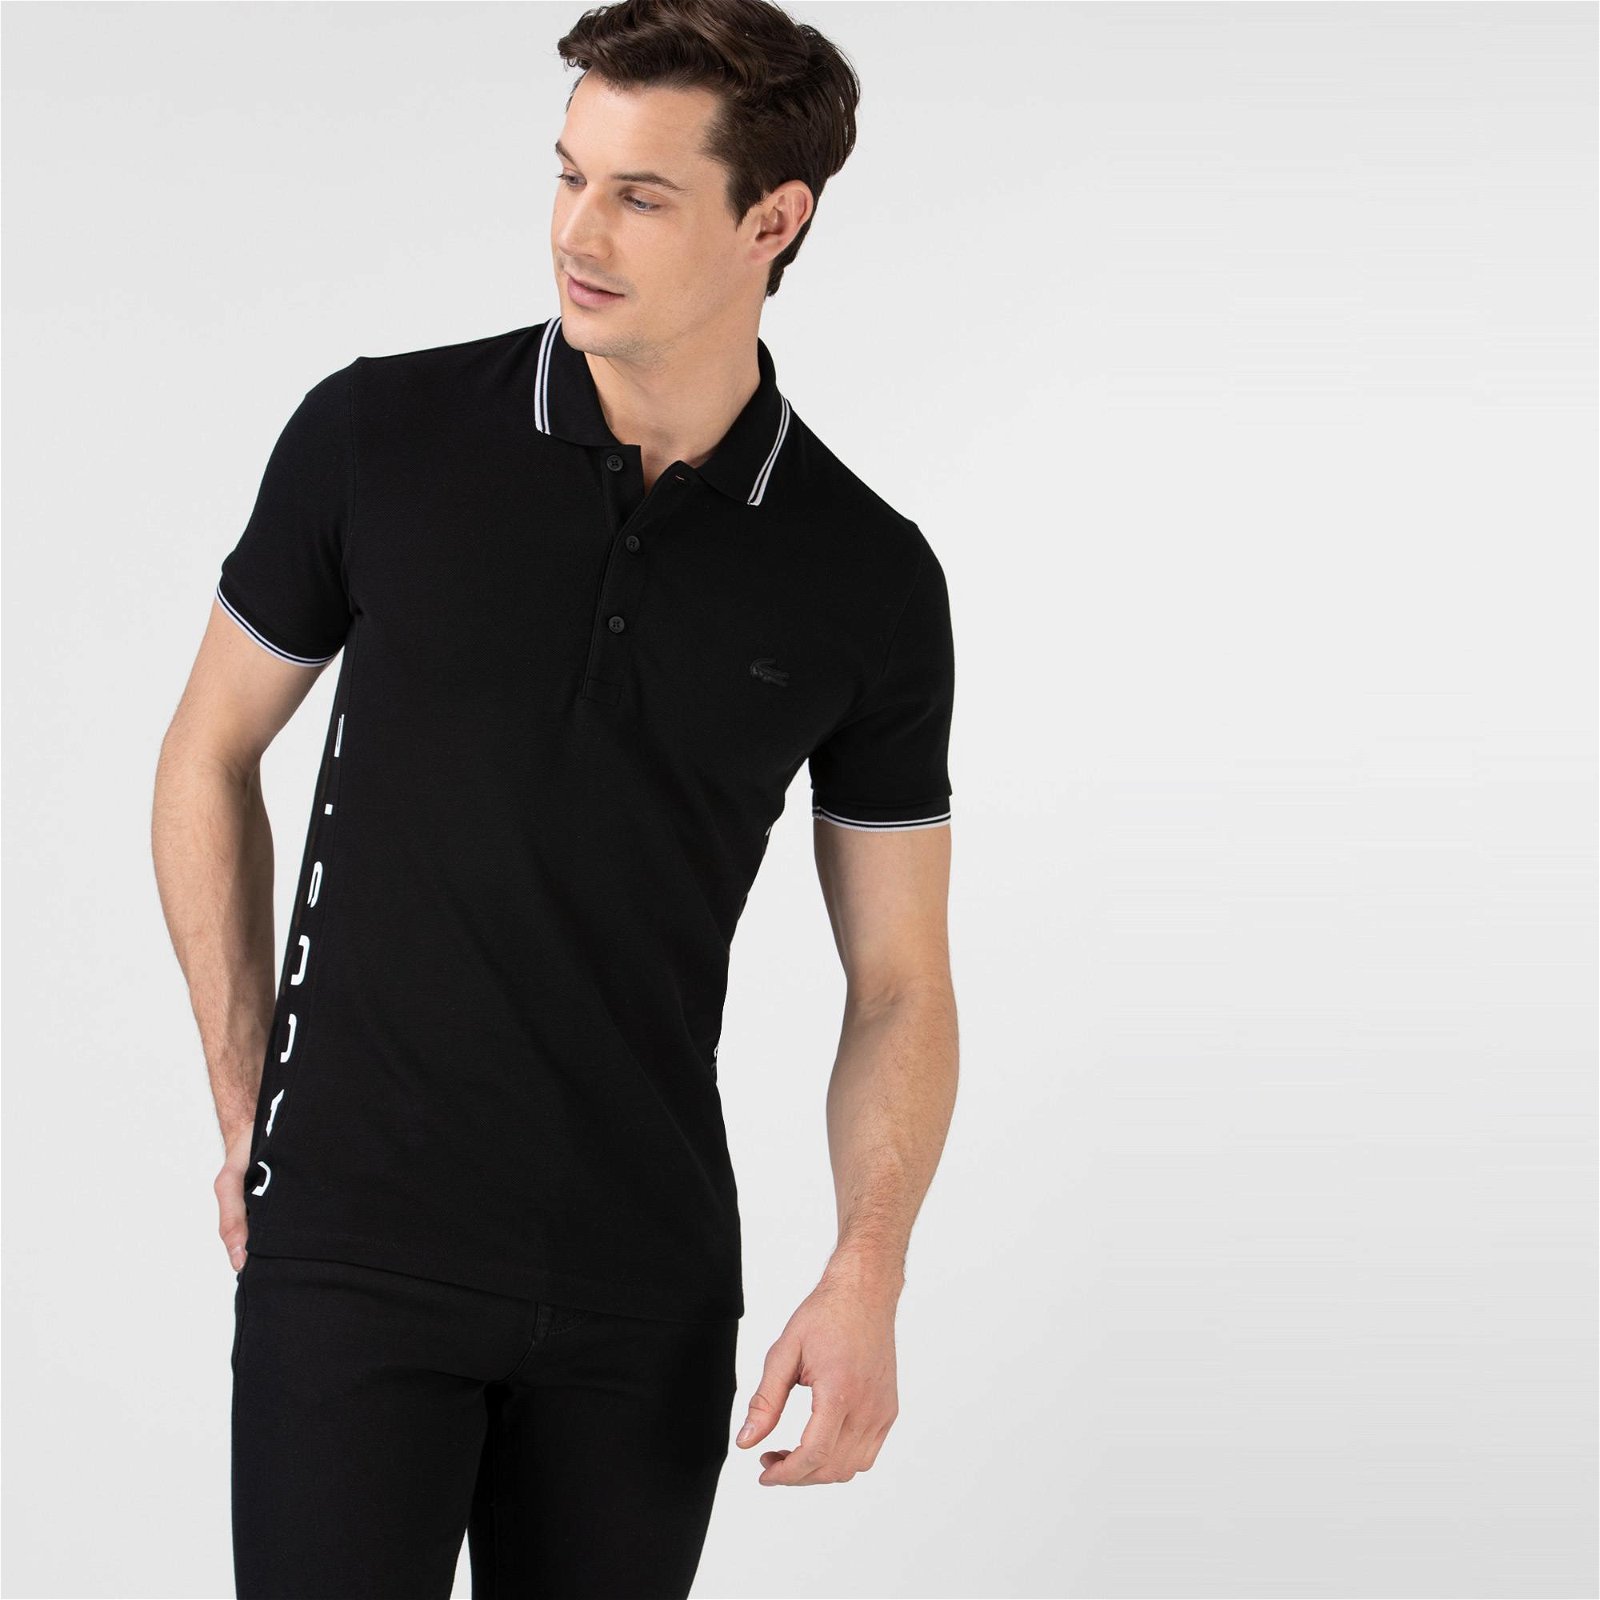 Lacoste Slim Fit Siyah Polo